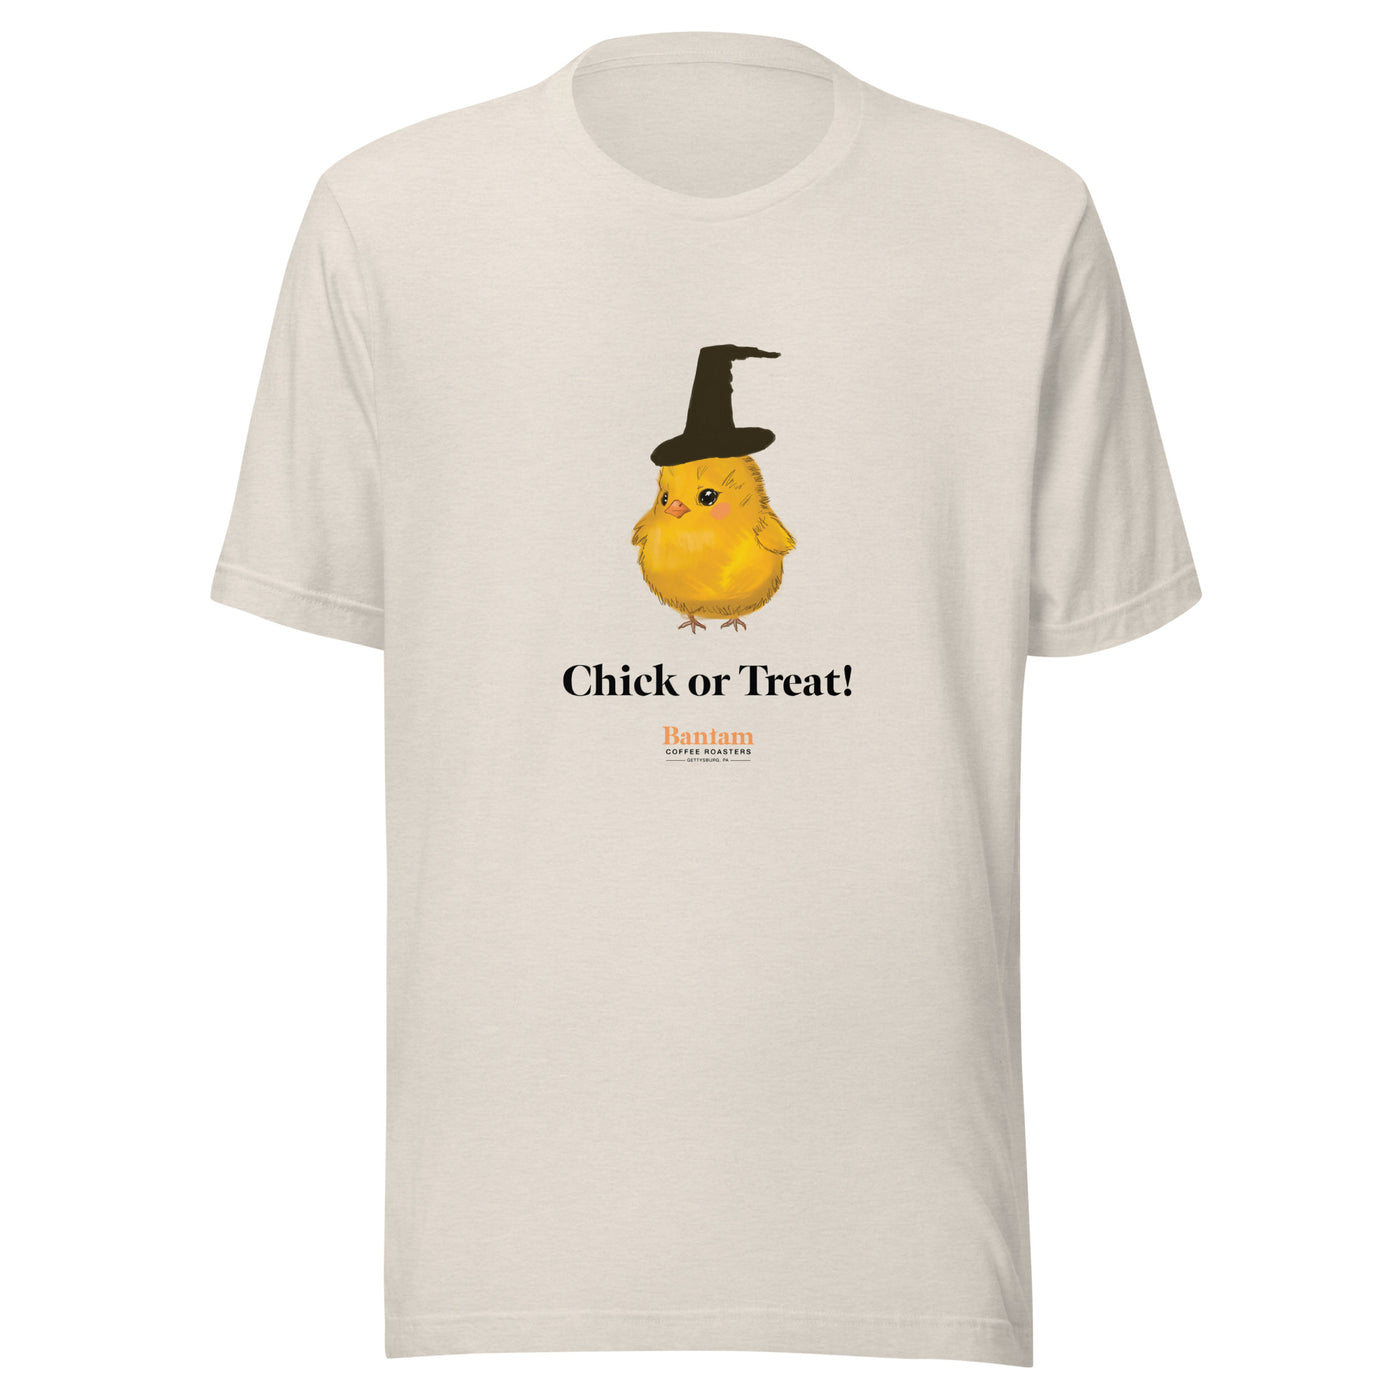 Chick or Treat